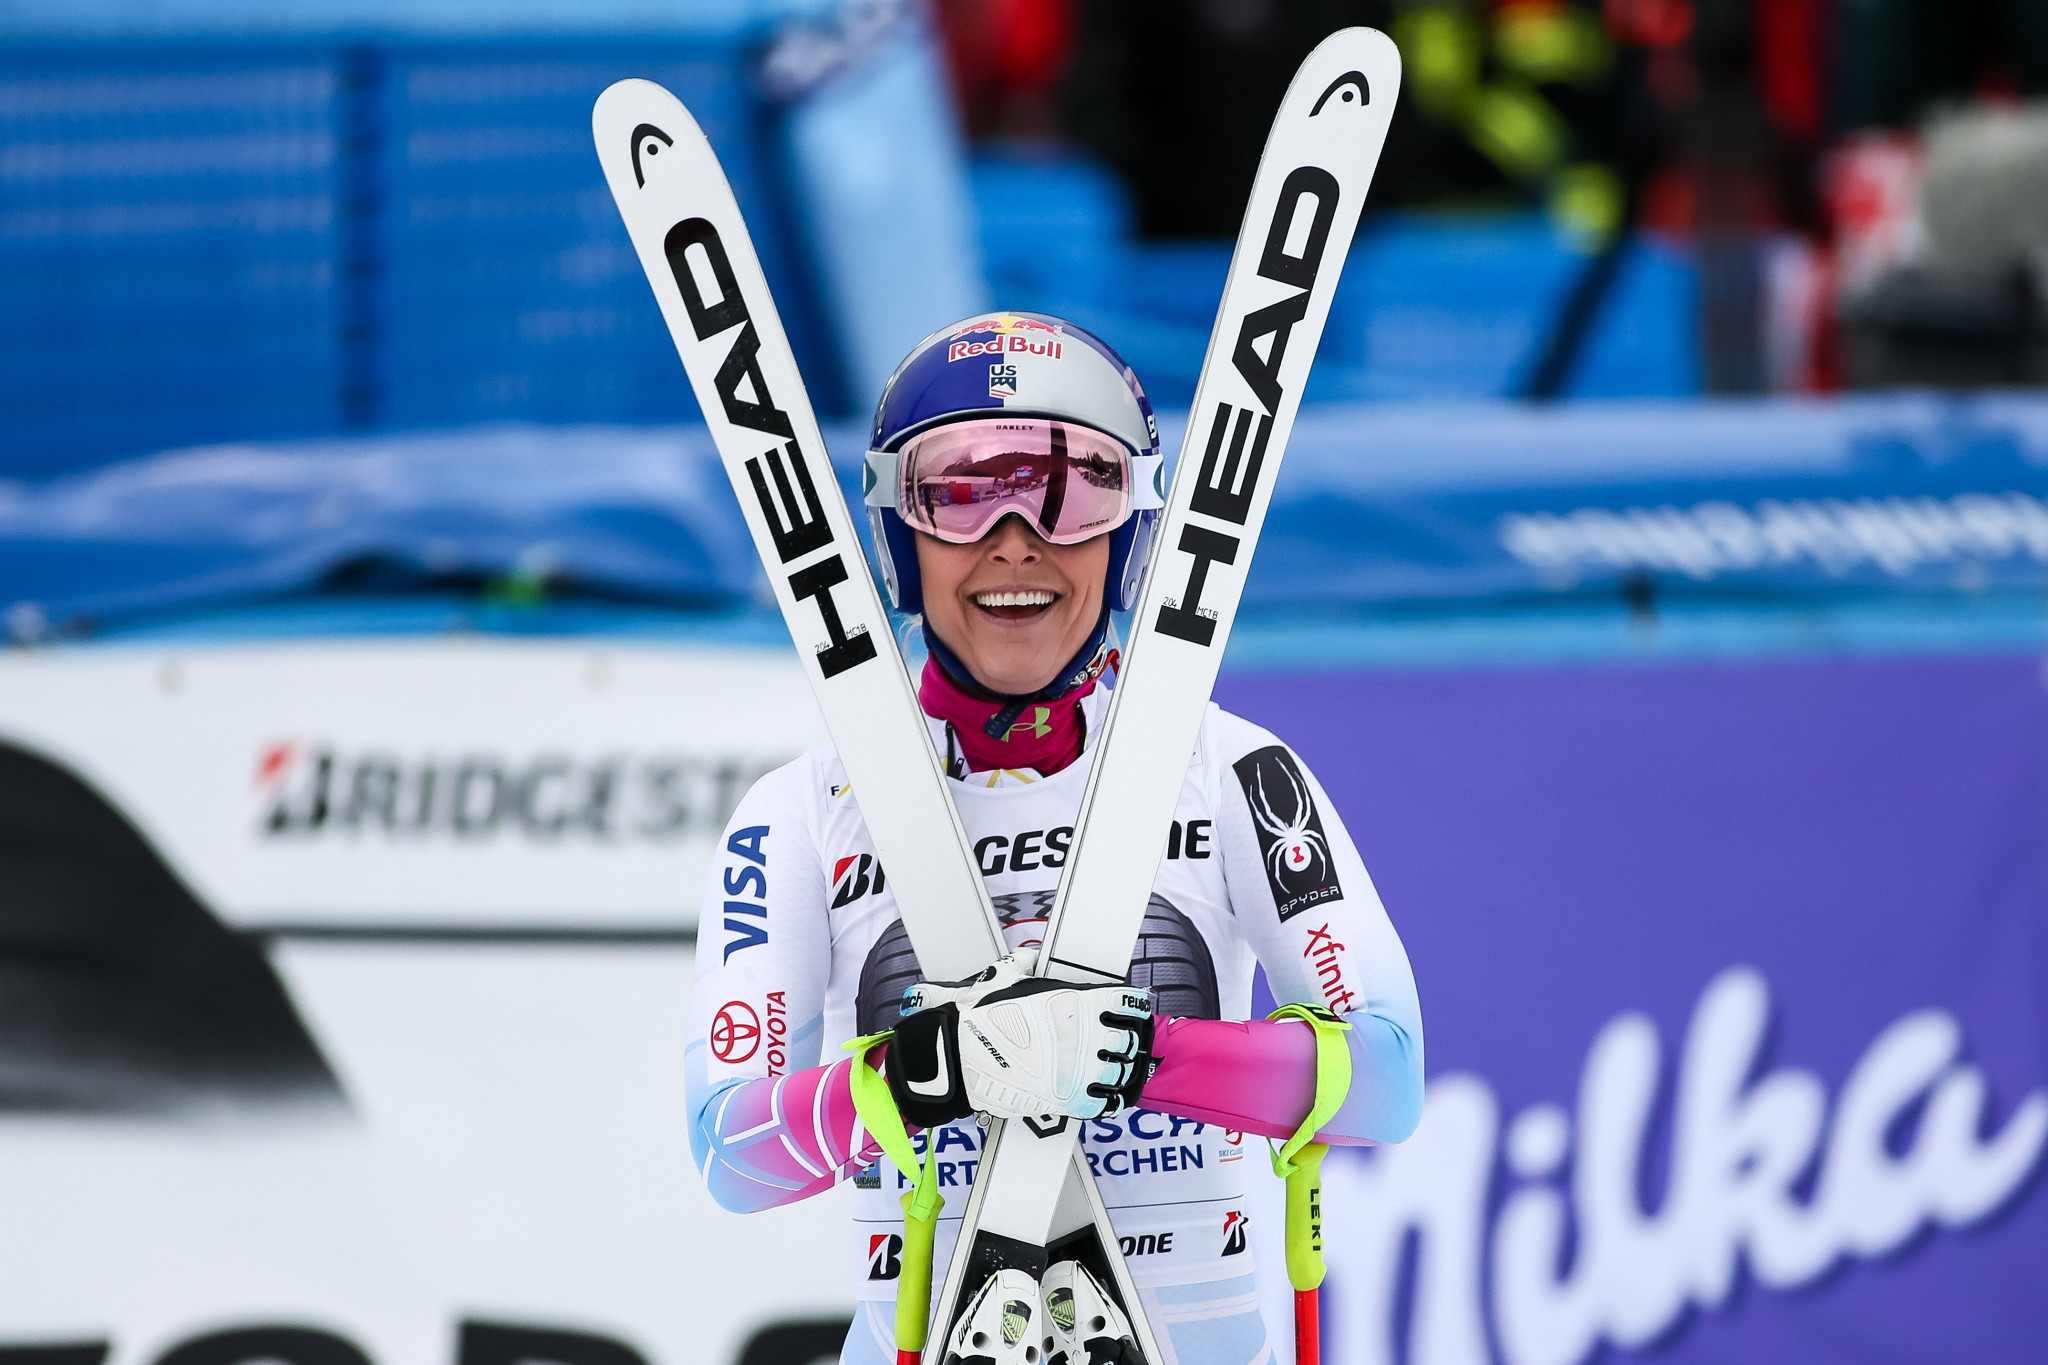 Lindsey Vonn will lead the United States downhill team at Pyeongchang 2018 ©Getty Images